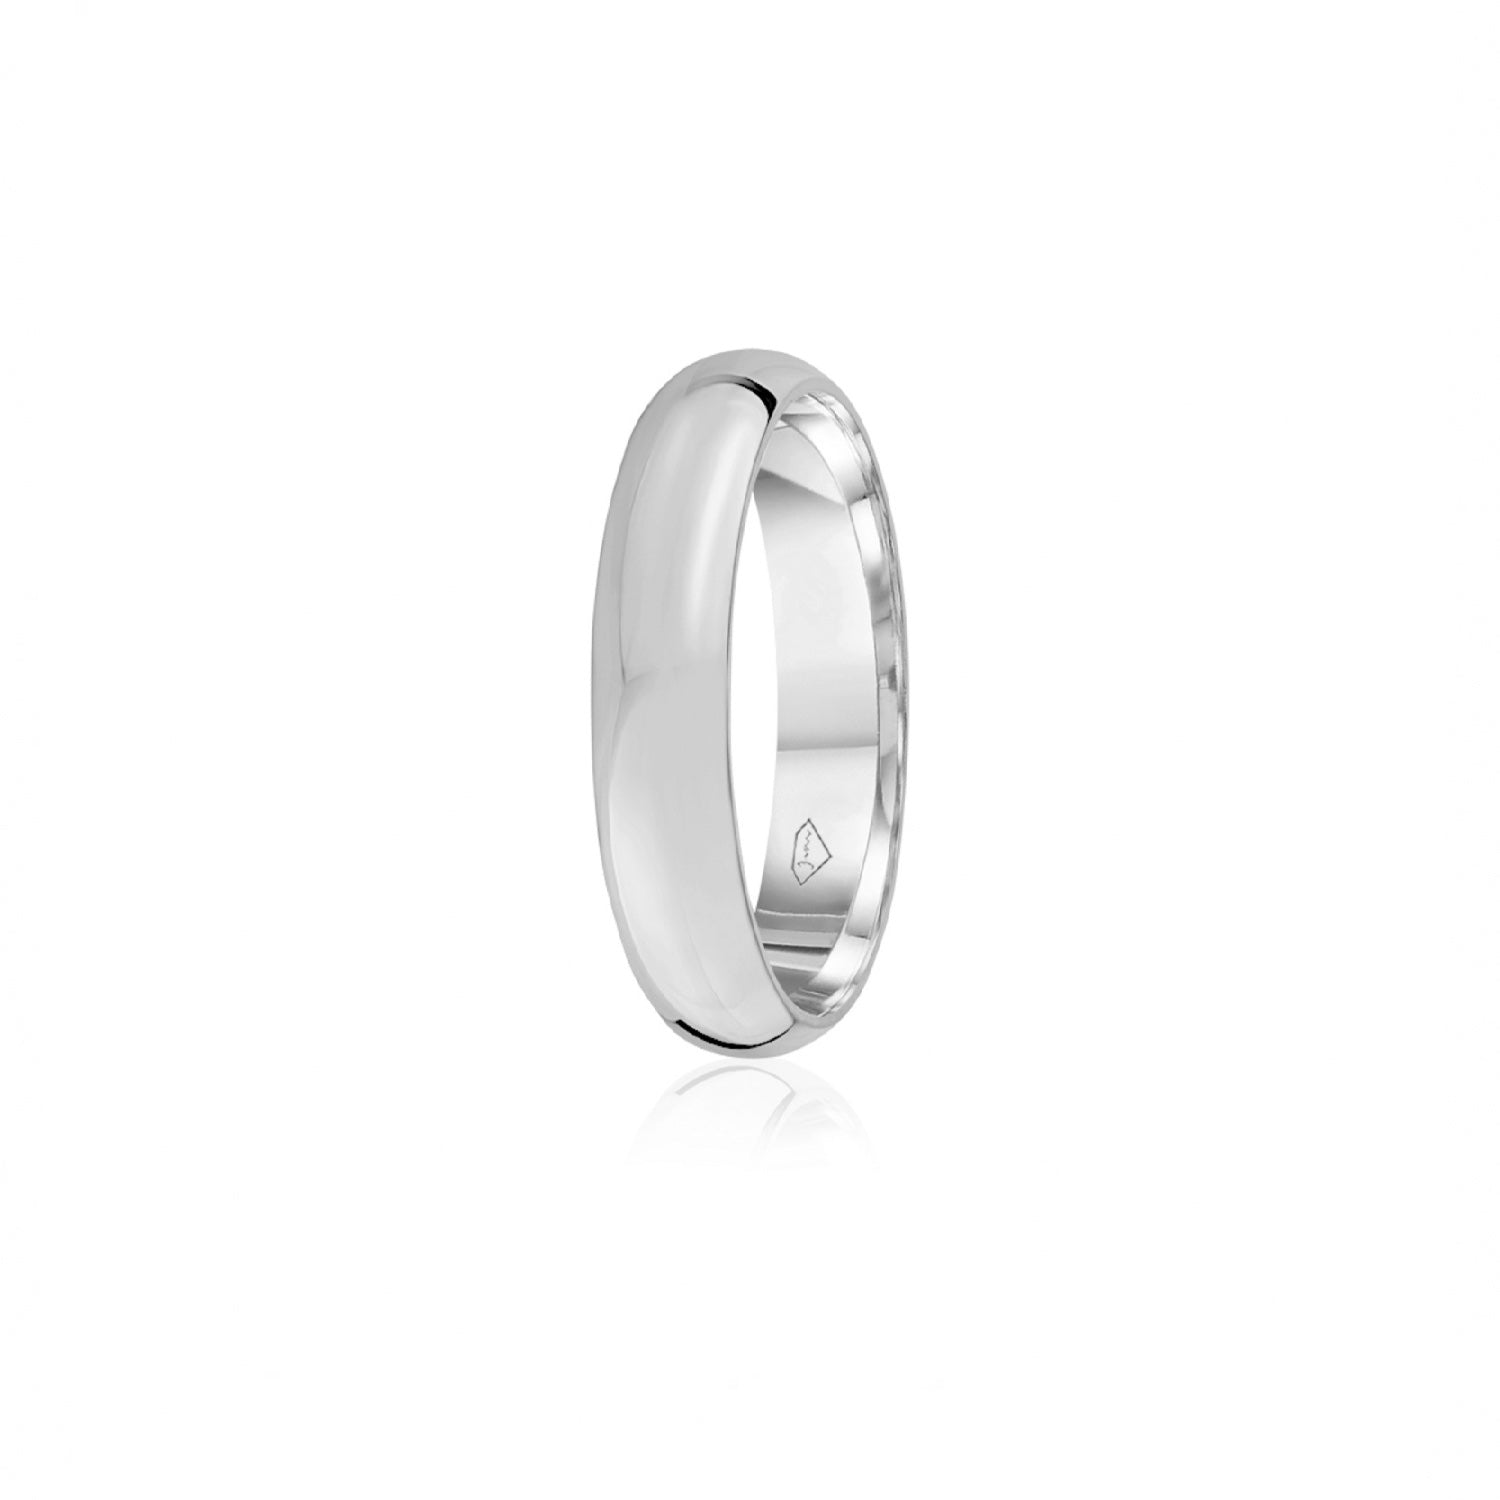 Classic Polished Finish Standard Fit 6-7 mm Wedding Band in White Gold